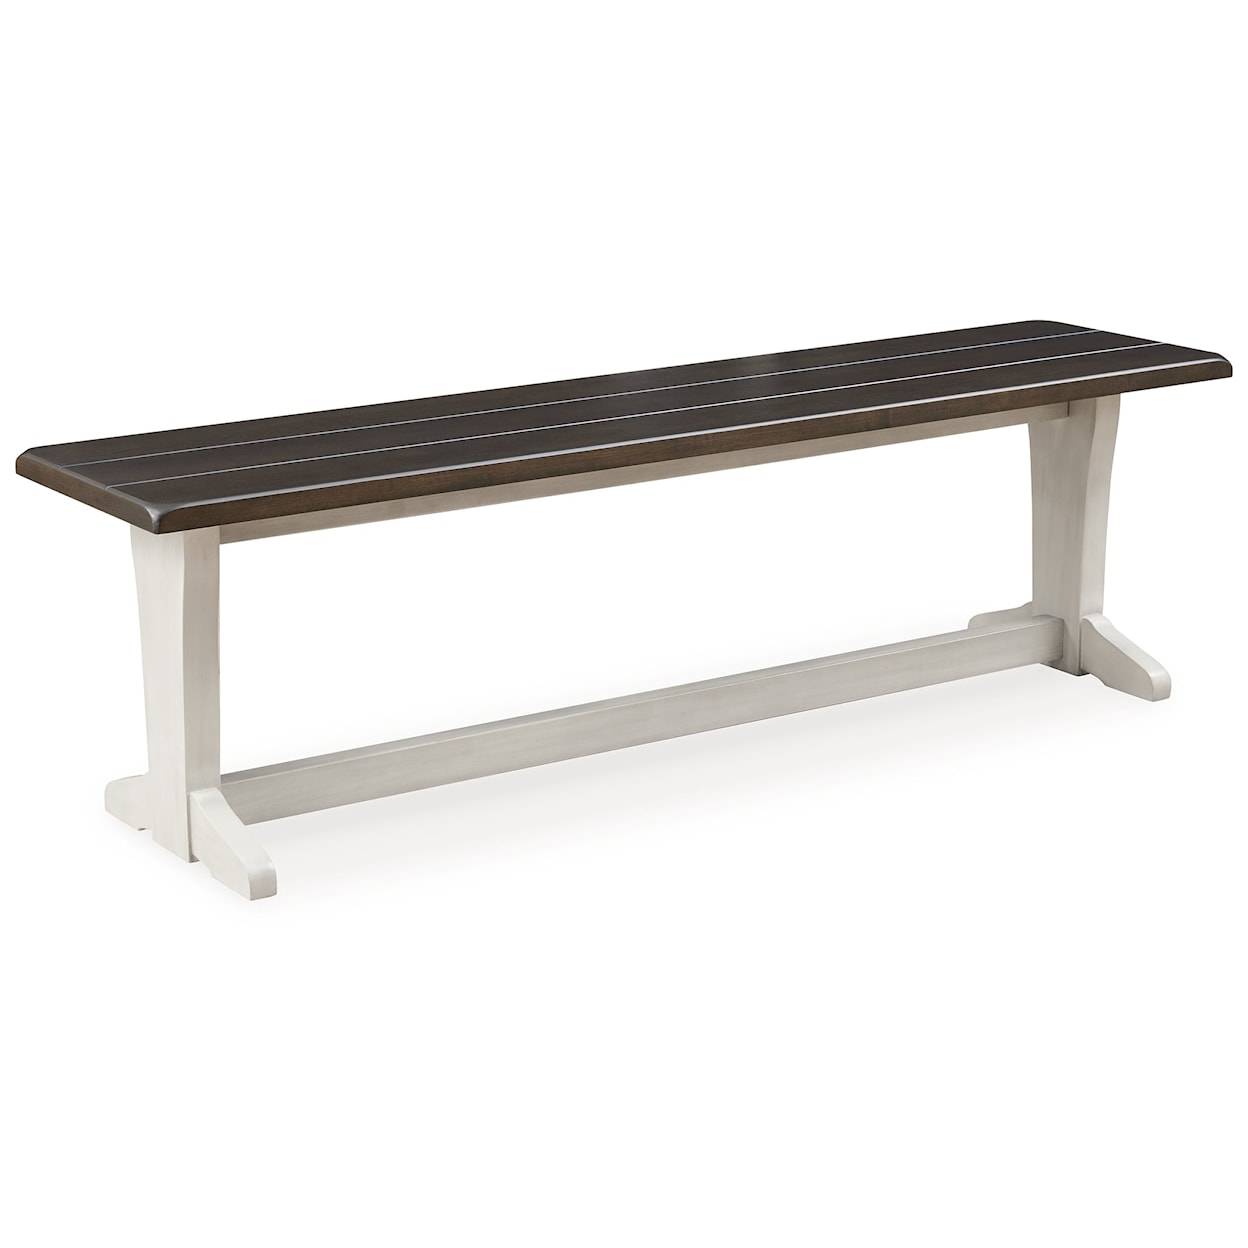 Michael Alan Select Darborn Large Dining Room Bench